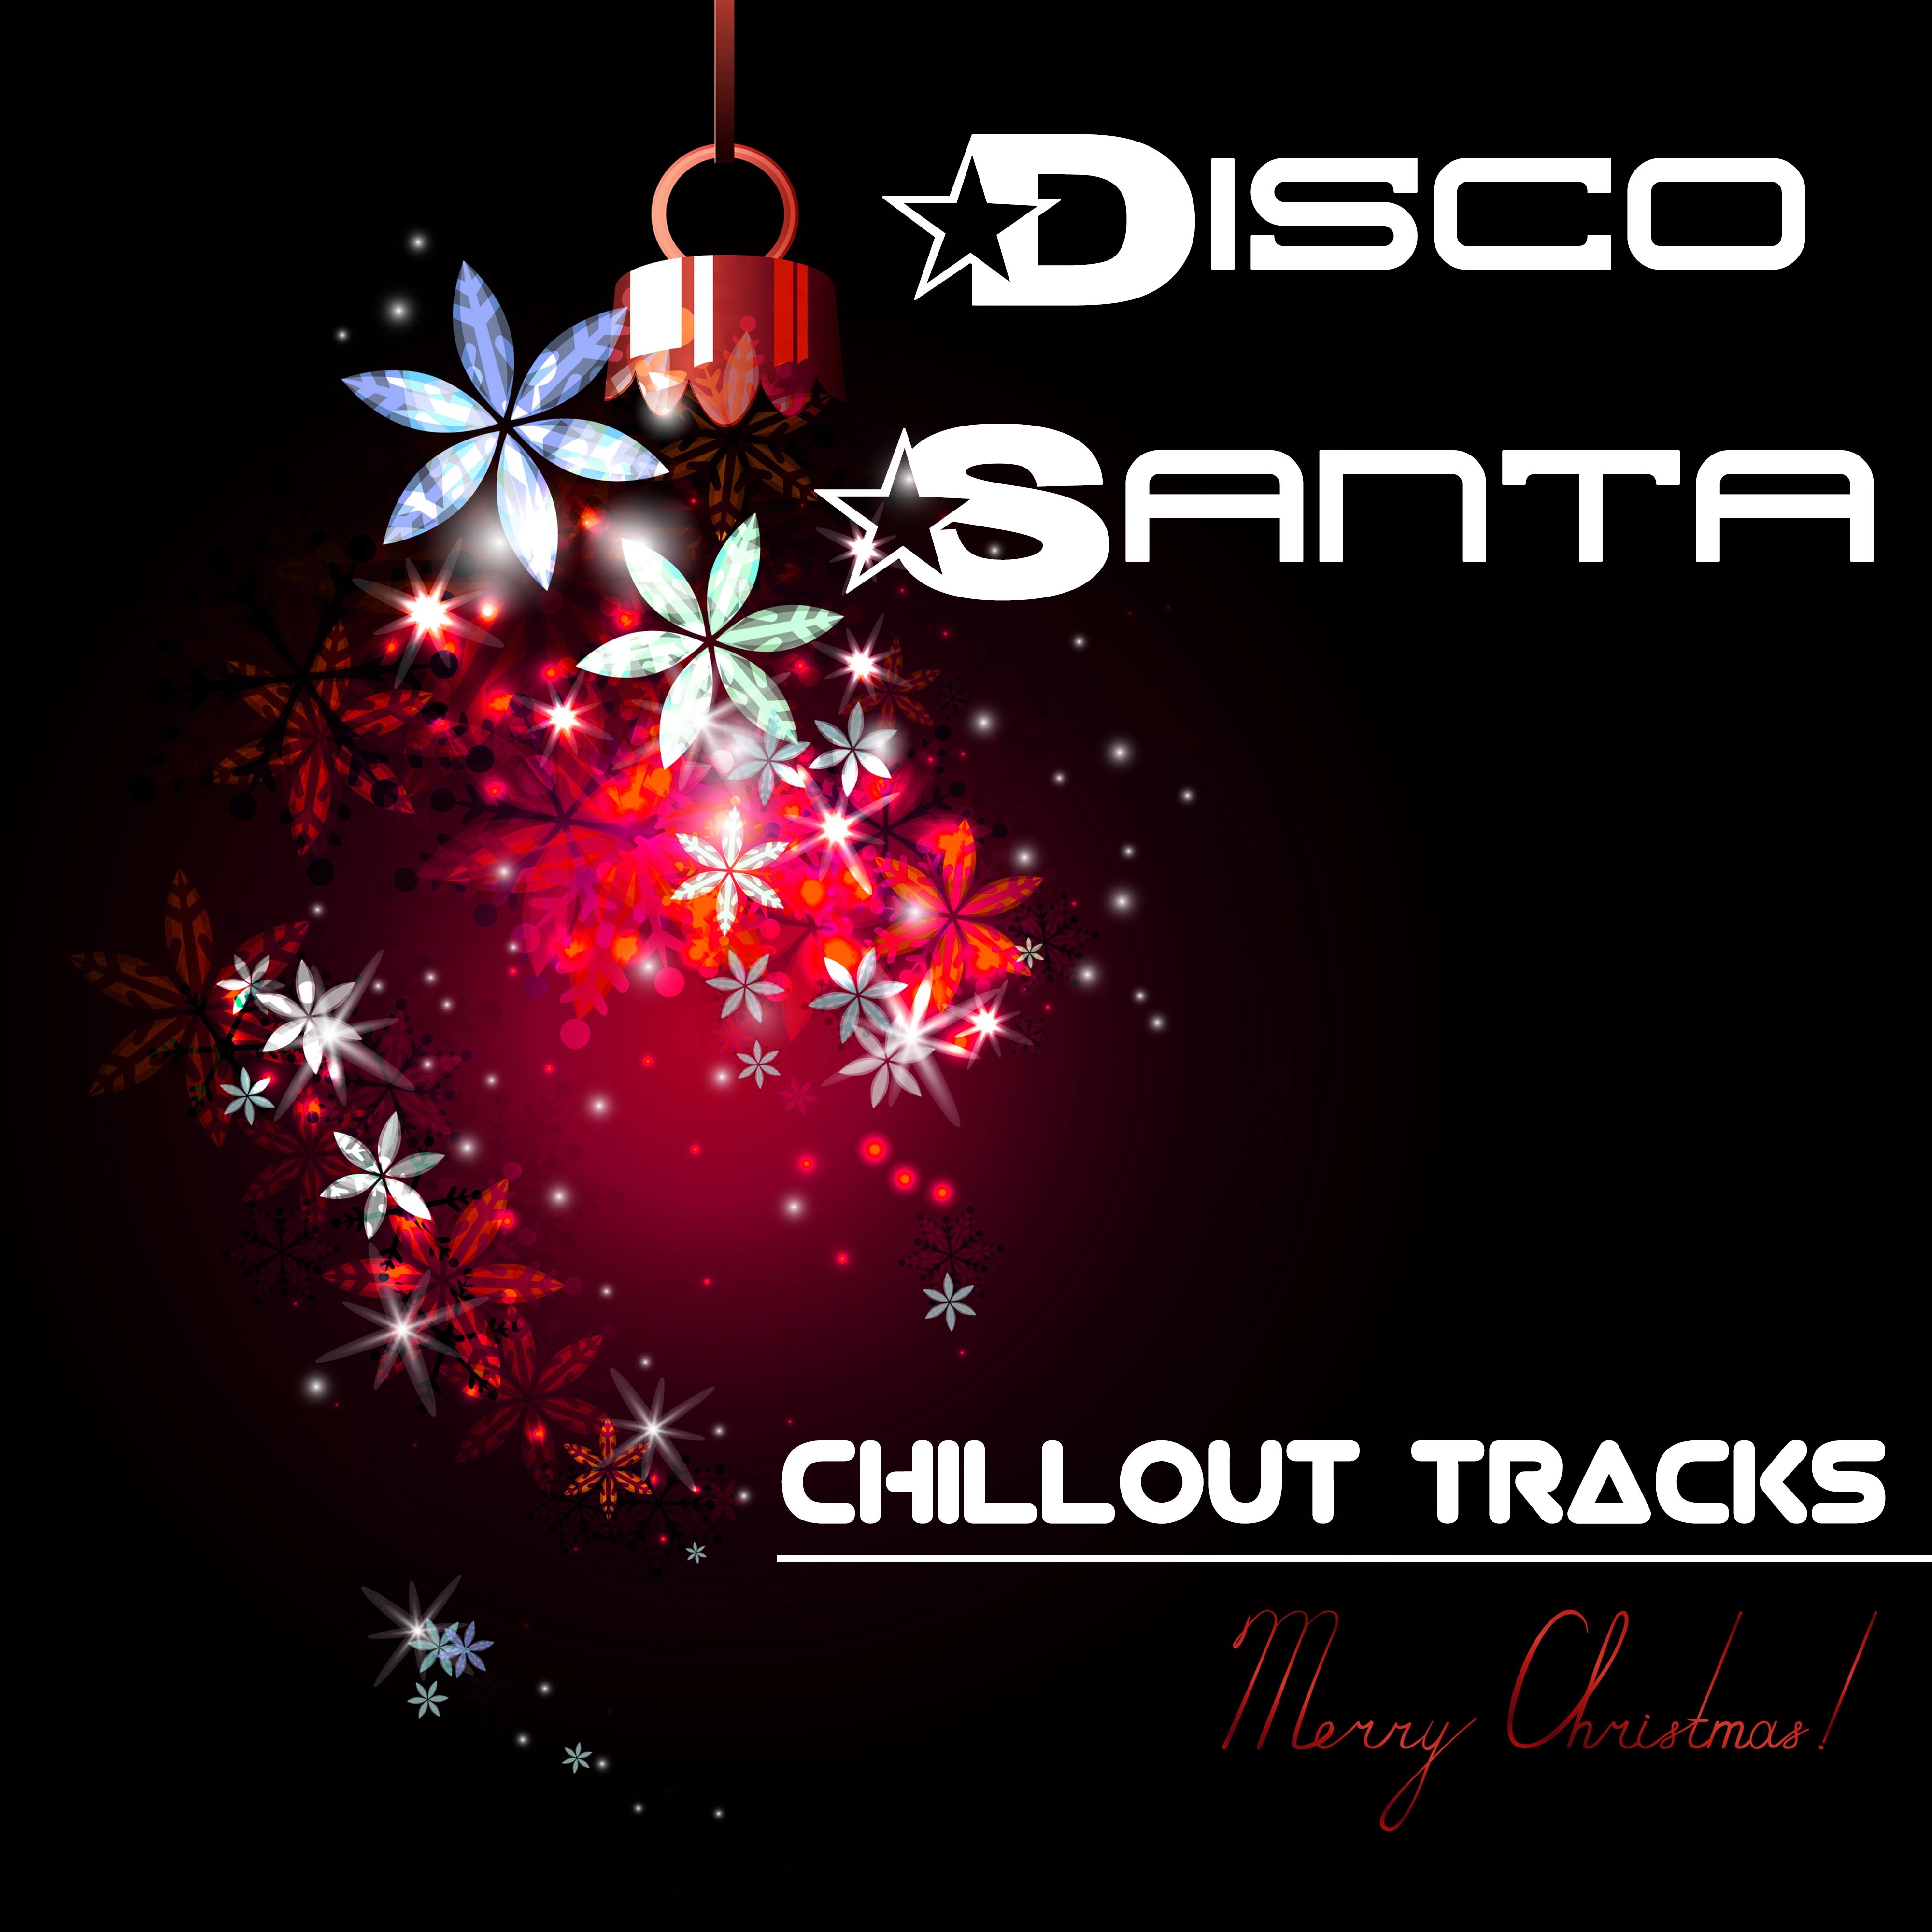 Disco Santa - Chillout Tracks to set you in the Mood for Christmas Time, Party Events and Party Songs